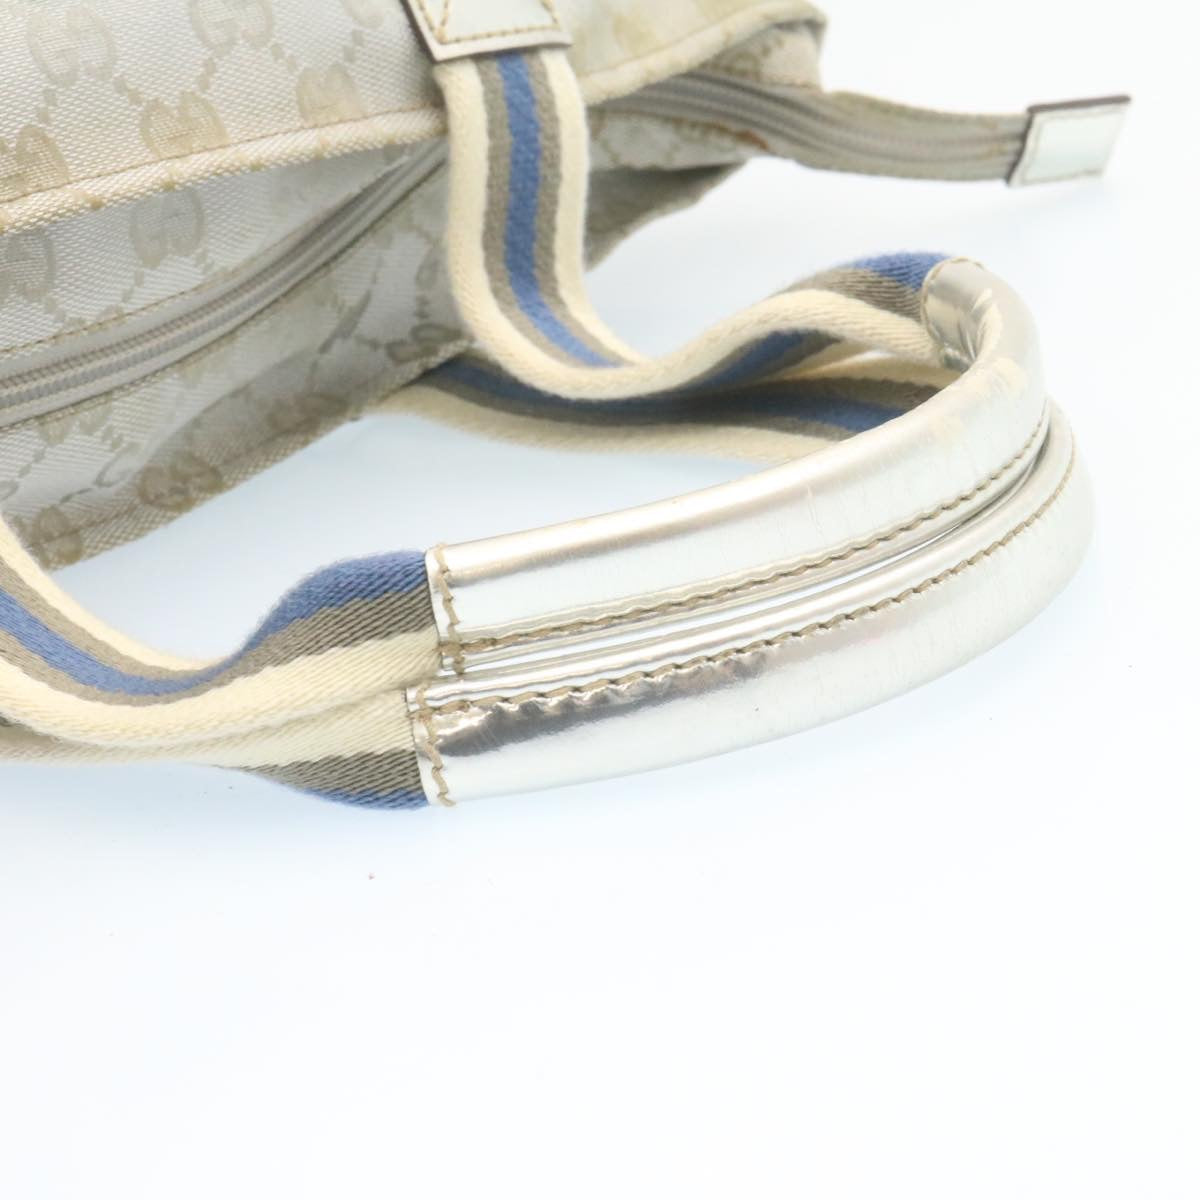 GUCCI Sherry Line GG Canvas Tote Bag Silver Blue Auth am1955g